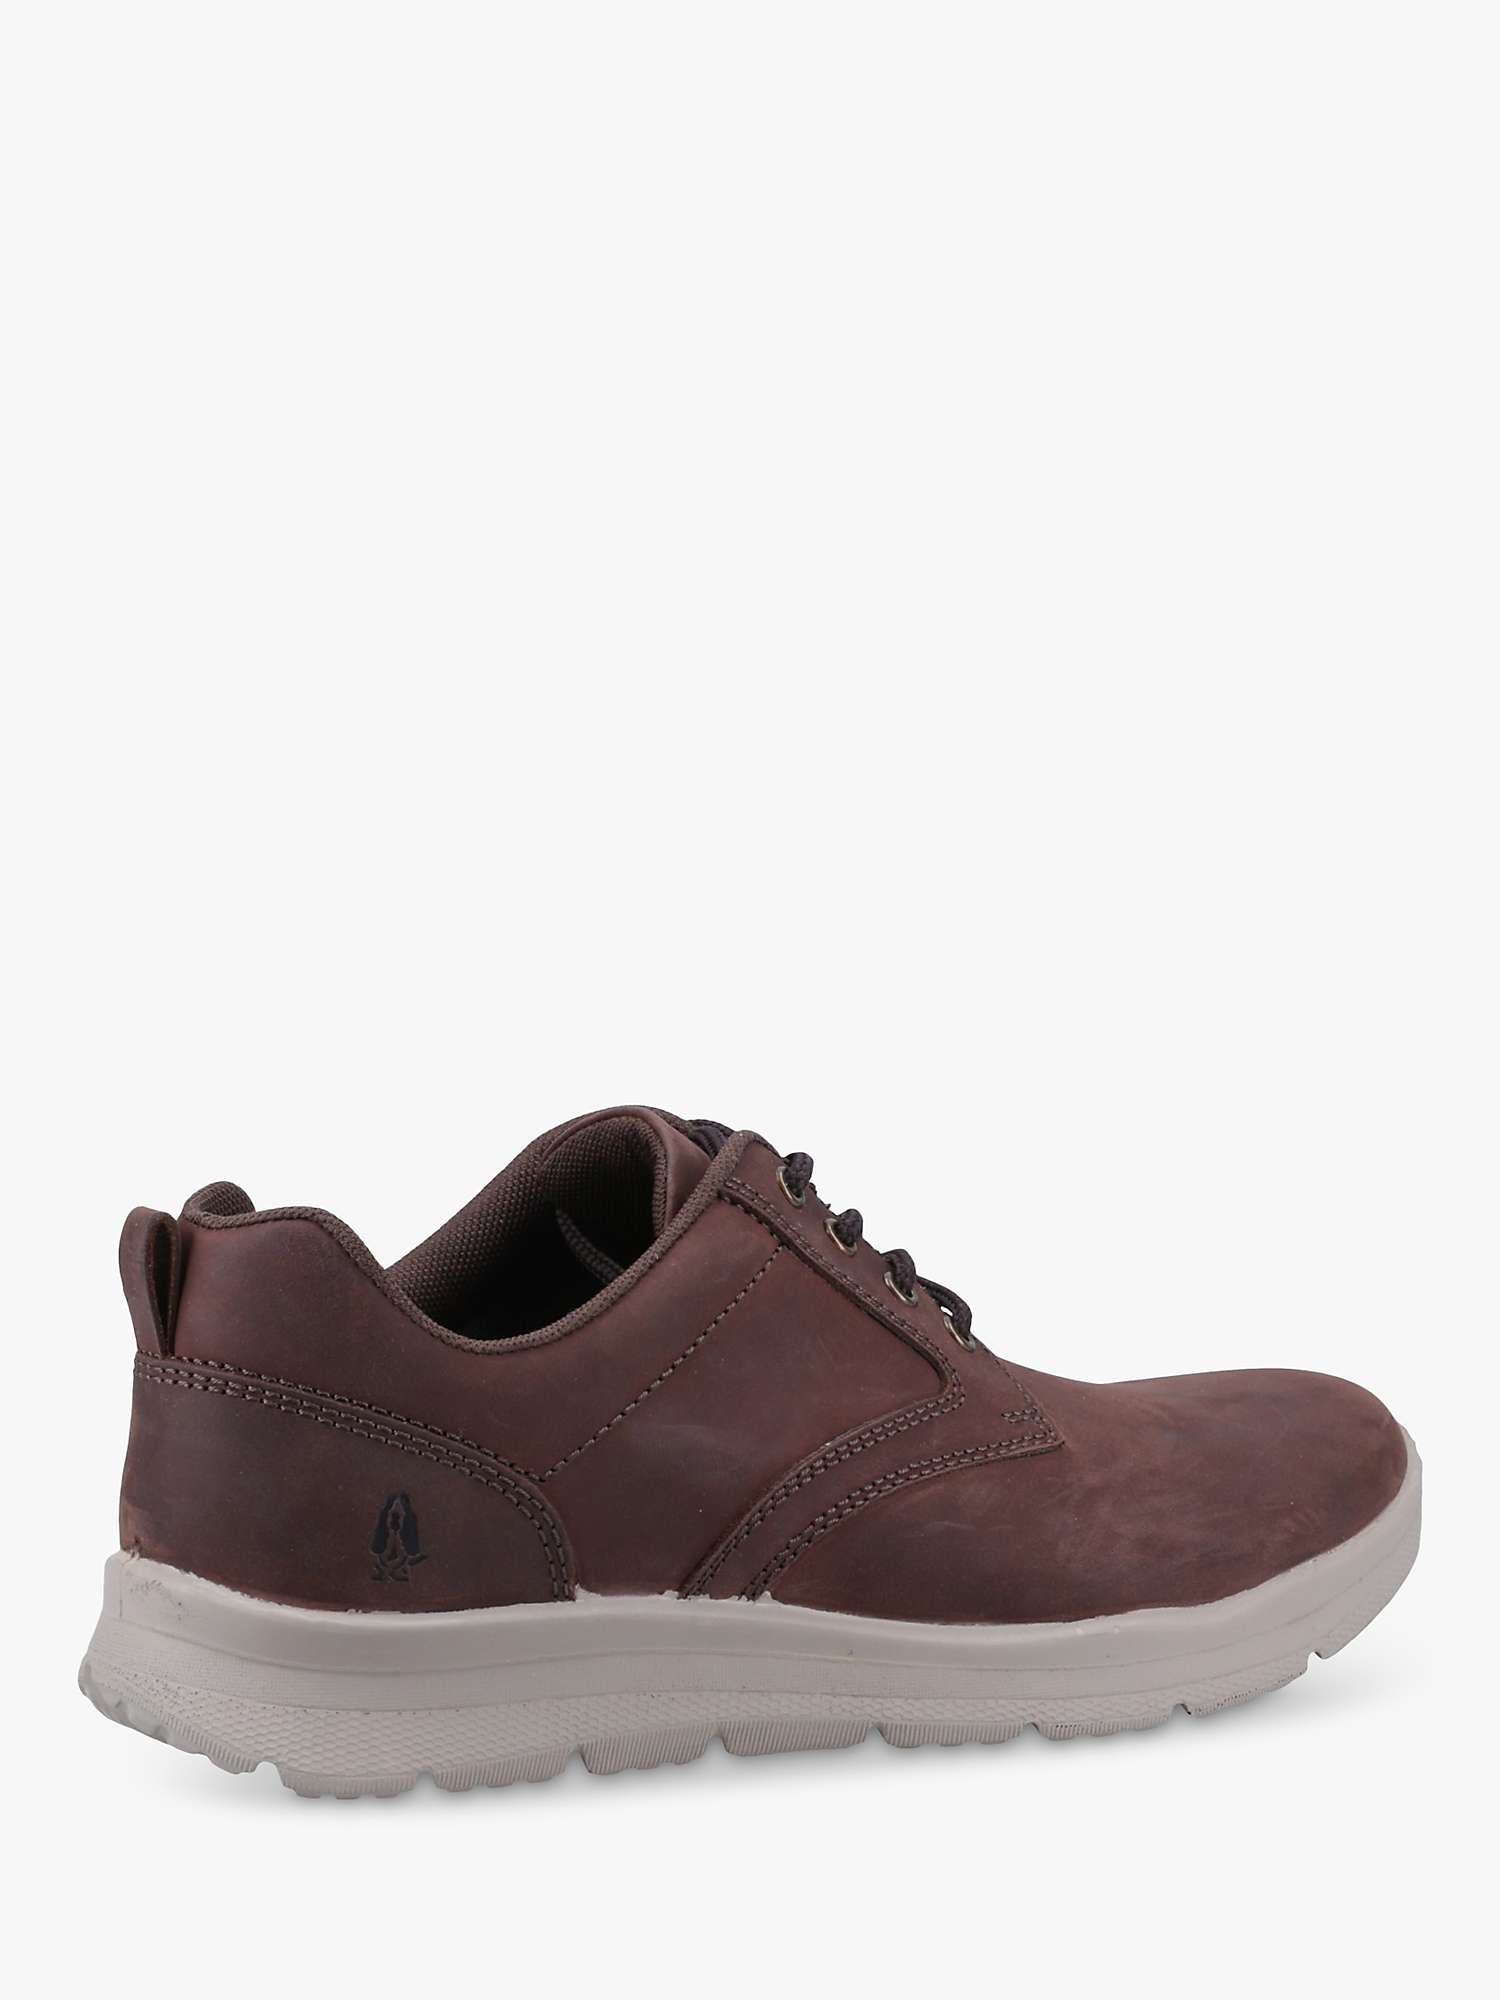 Buy Hush Puppies Fergus Leather Trainers Online at johnlewis.com